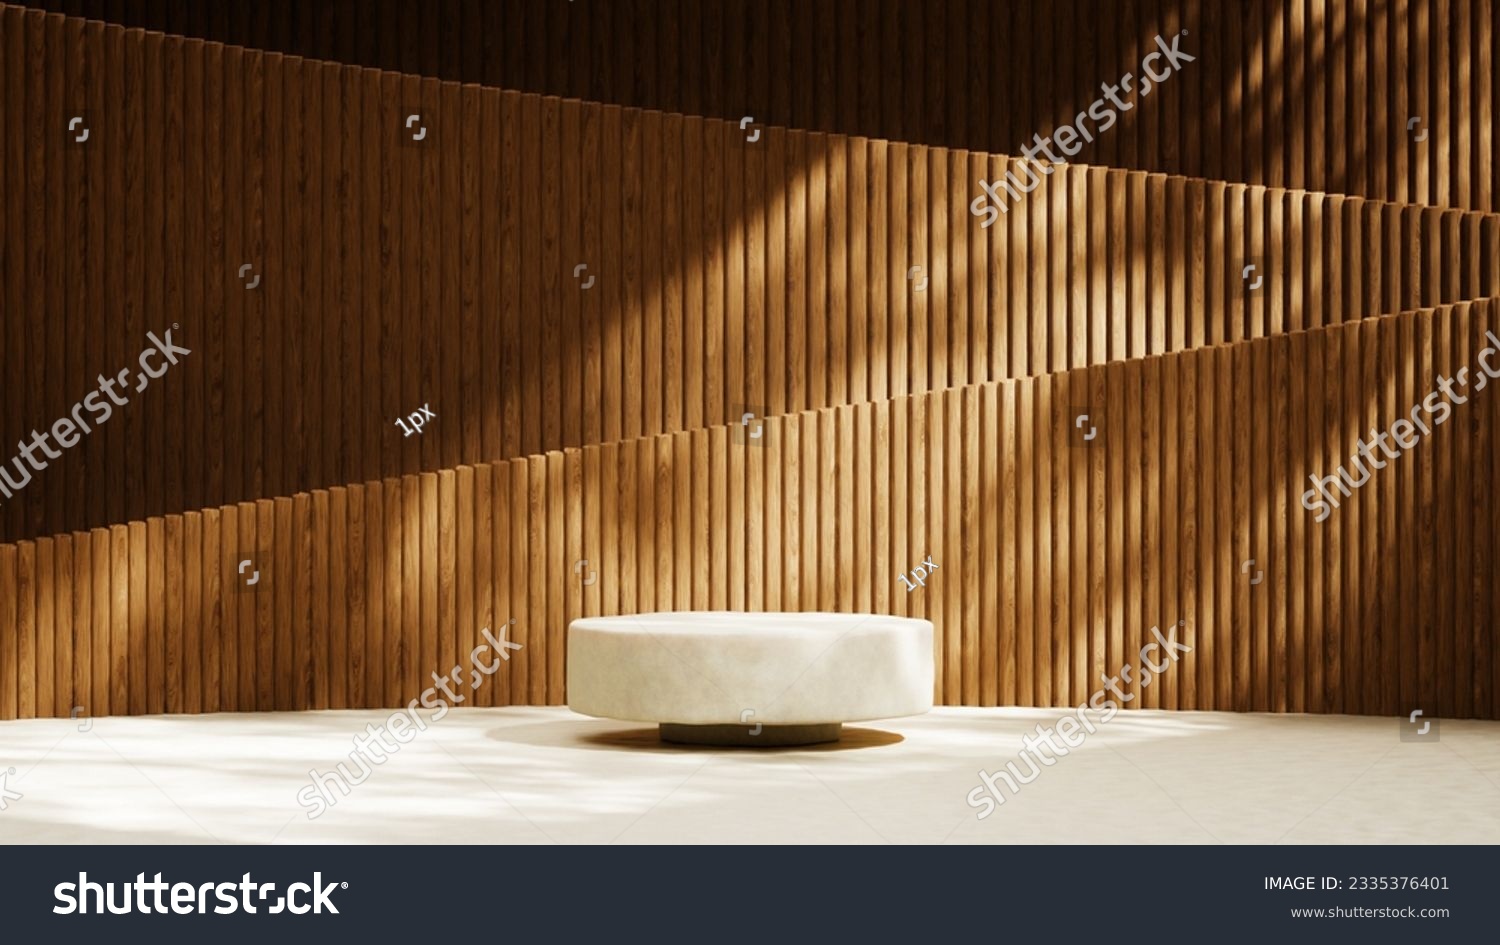 Luxurious stonemarble pedestal basks in foliage gobo sunlight. Wooden rod backdrop adds depth and elegance. Ideal for premium product showcases and sophisticated designs. #2335376401